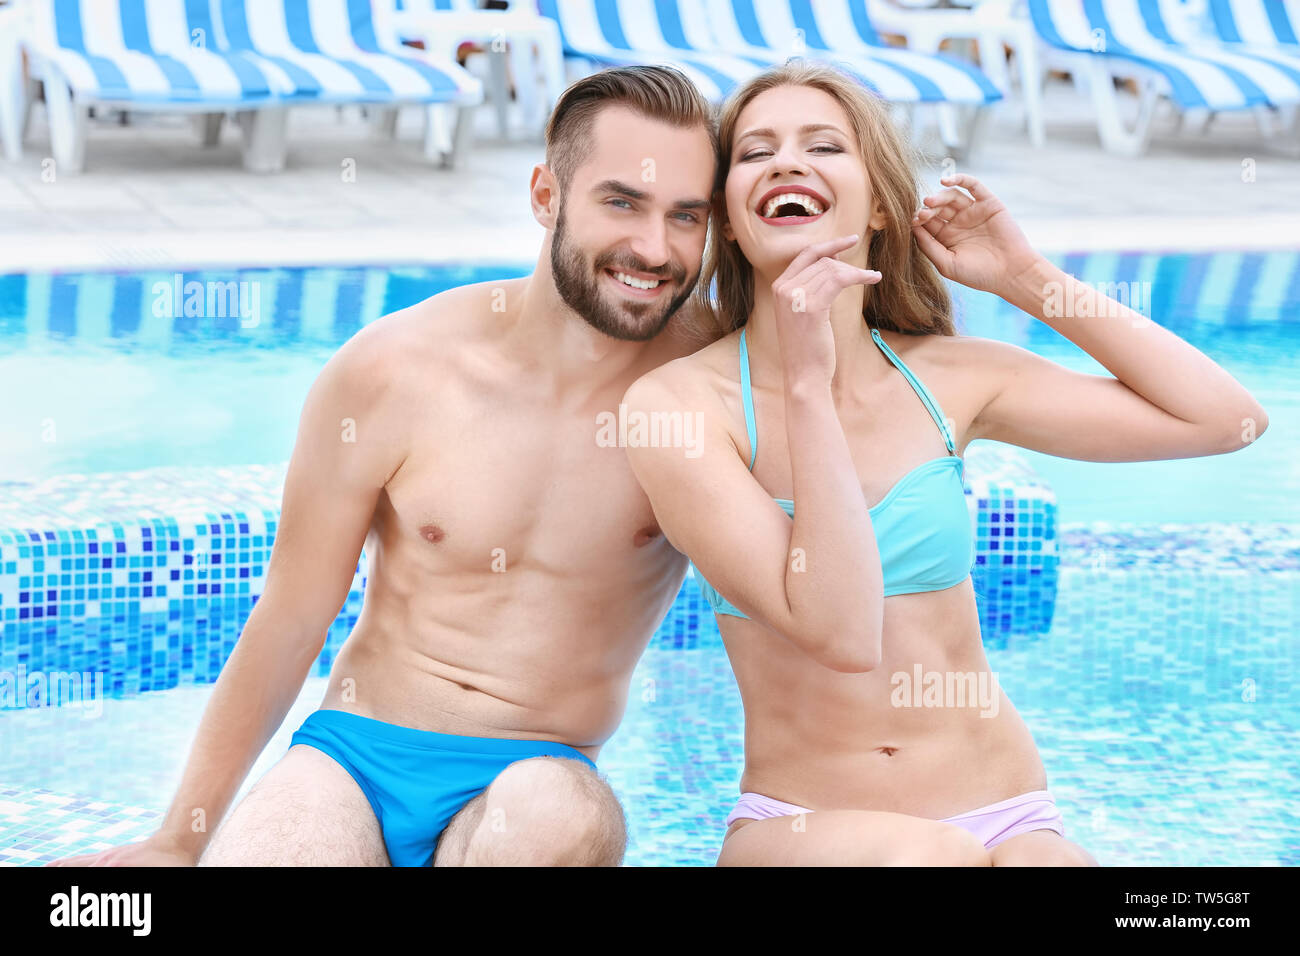 https://c8.alamy.com/comp/TW5G8T/happy-young-couple-sitting-near-swimming-pool-TW5G8T.jpg